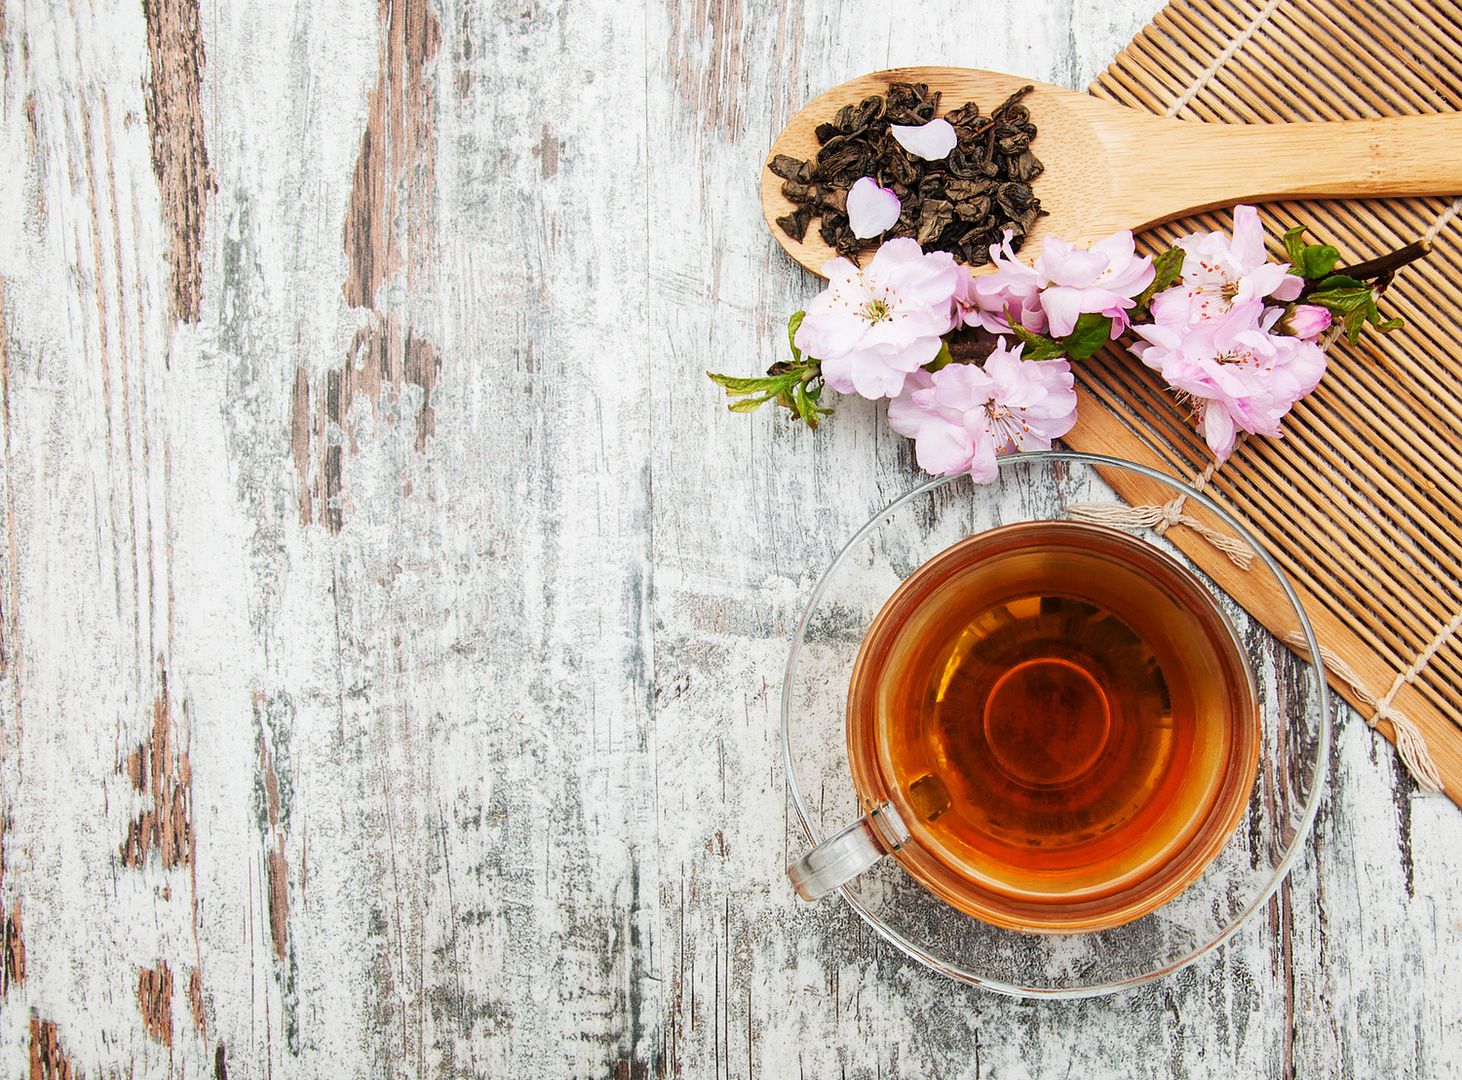 Great tip for brewing delicious tea: use spring water or filtered water. You'll taste the difference. 